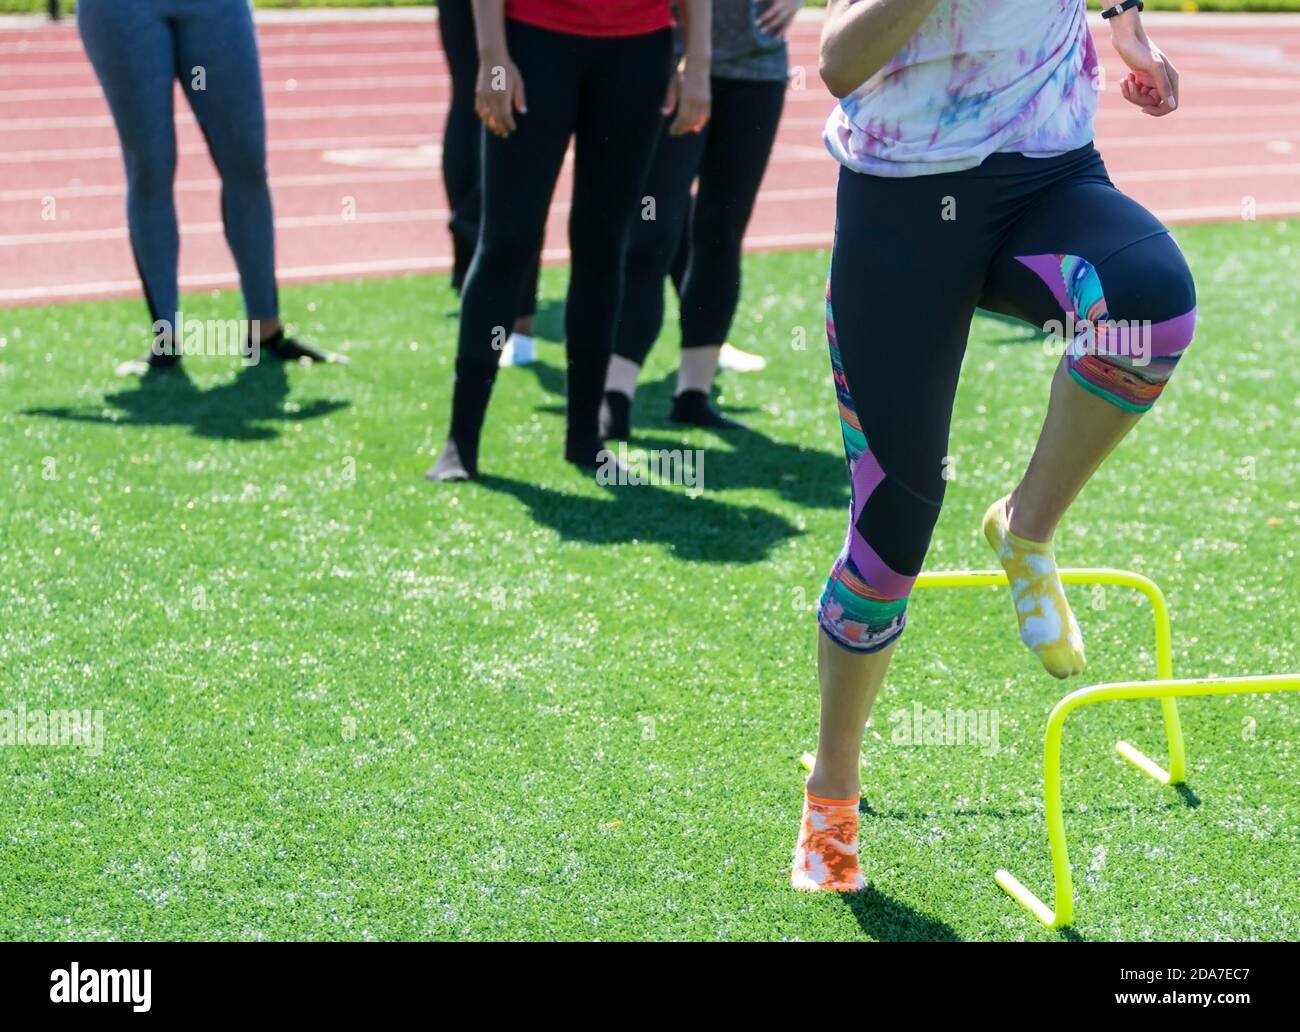 Track runners stepping over yellow mini hurdles with no shoes on wearing socks on a green turf field during high school track and field practice. Stock Photo